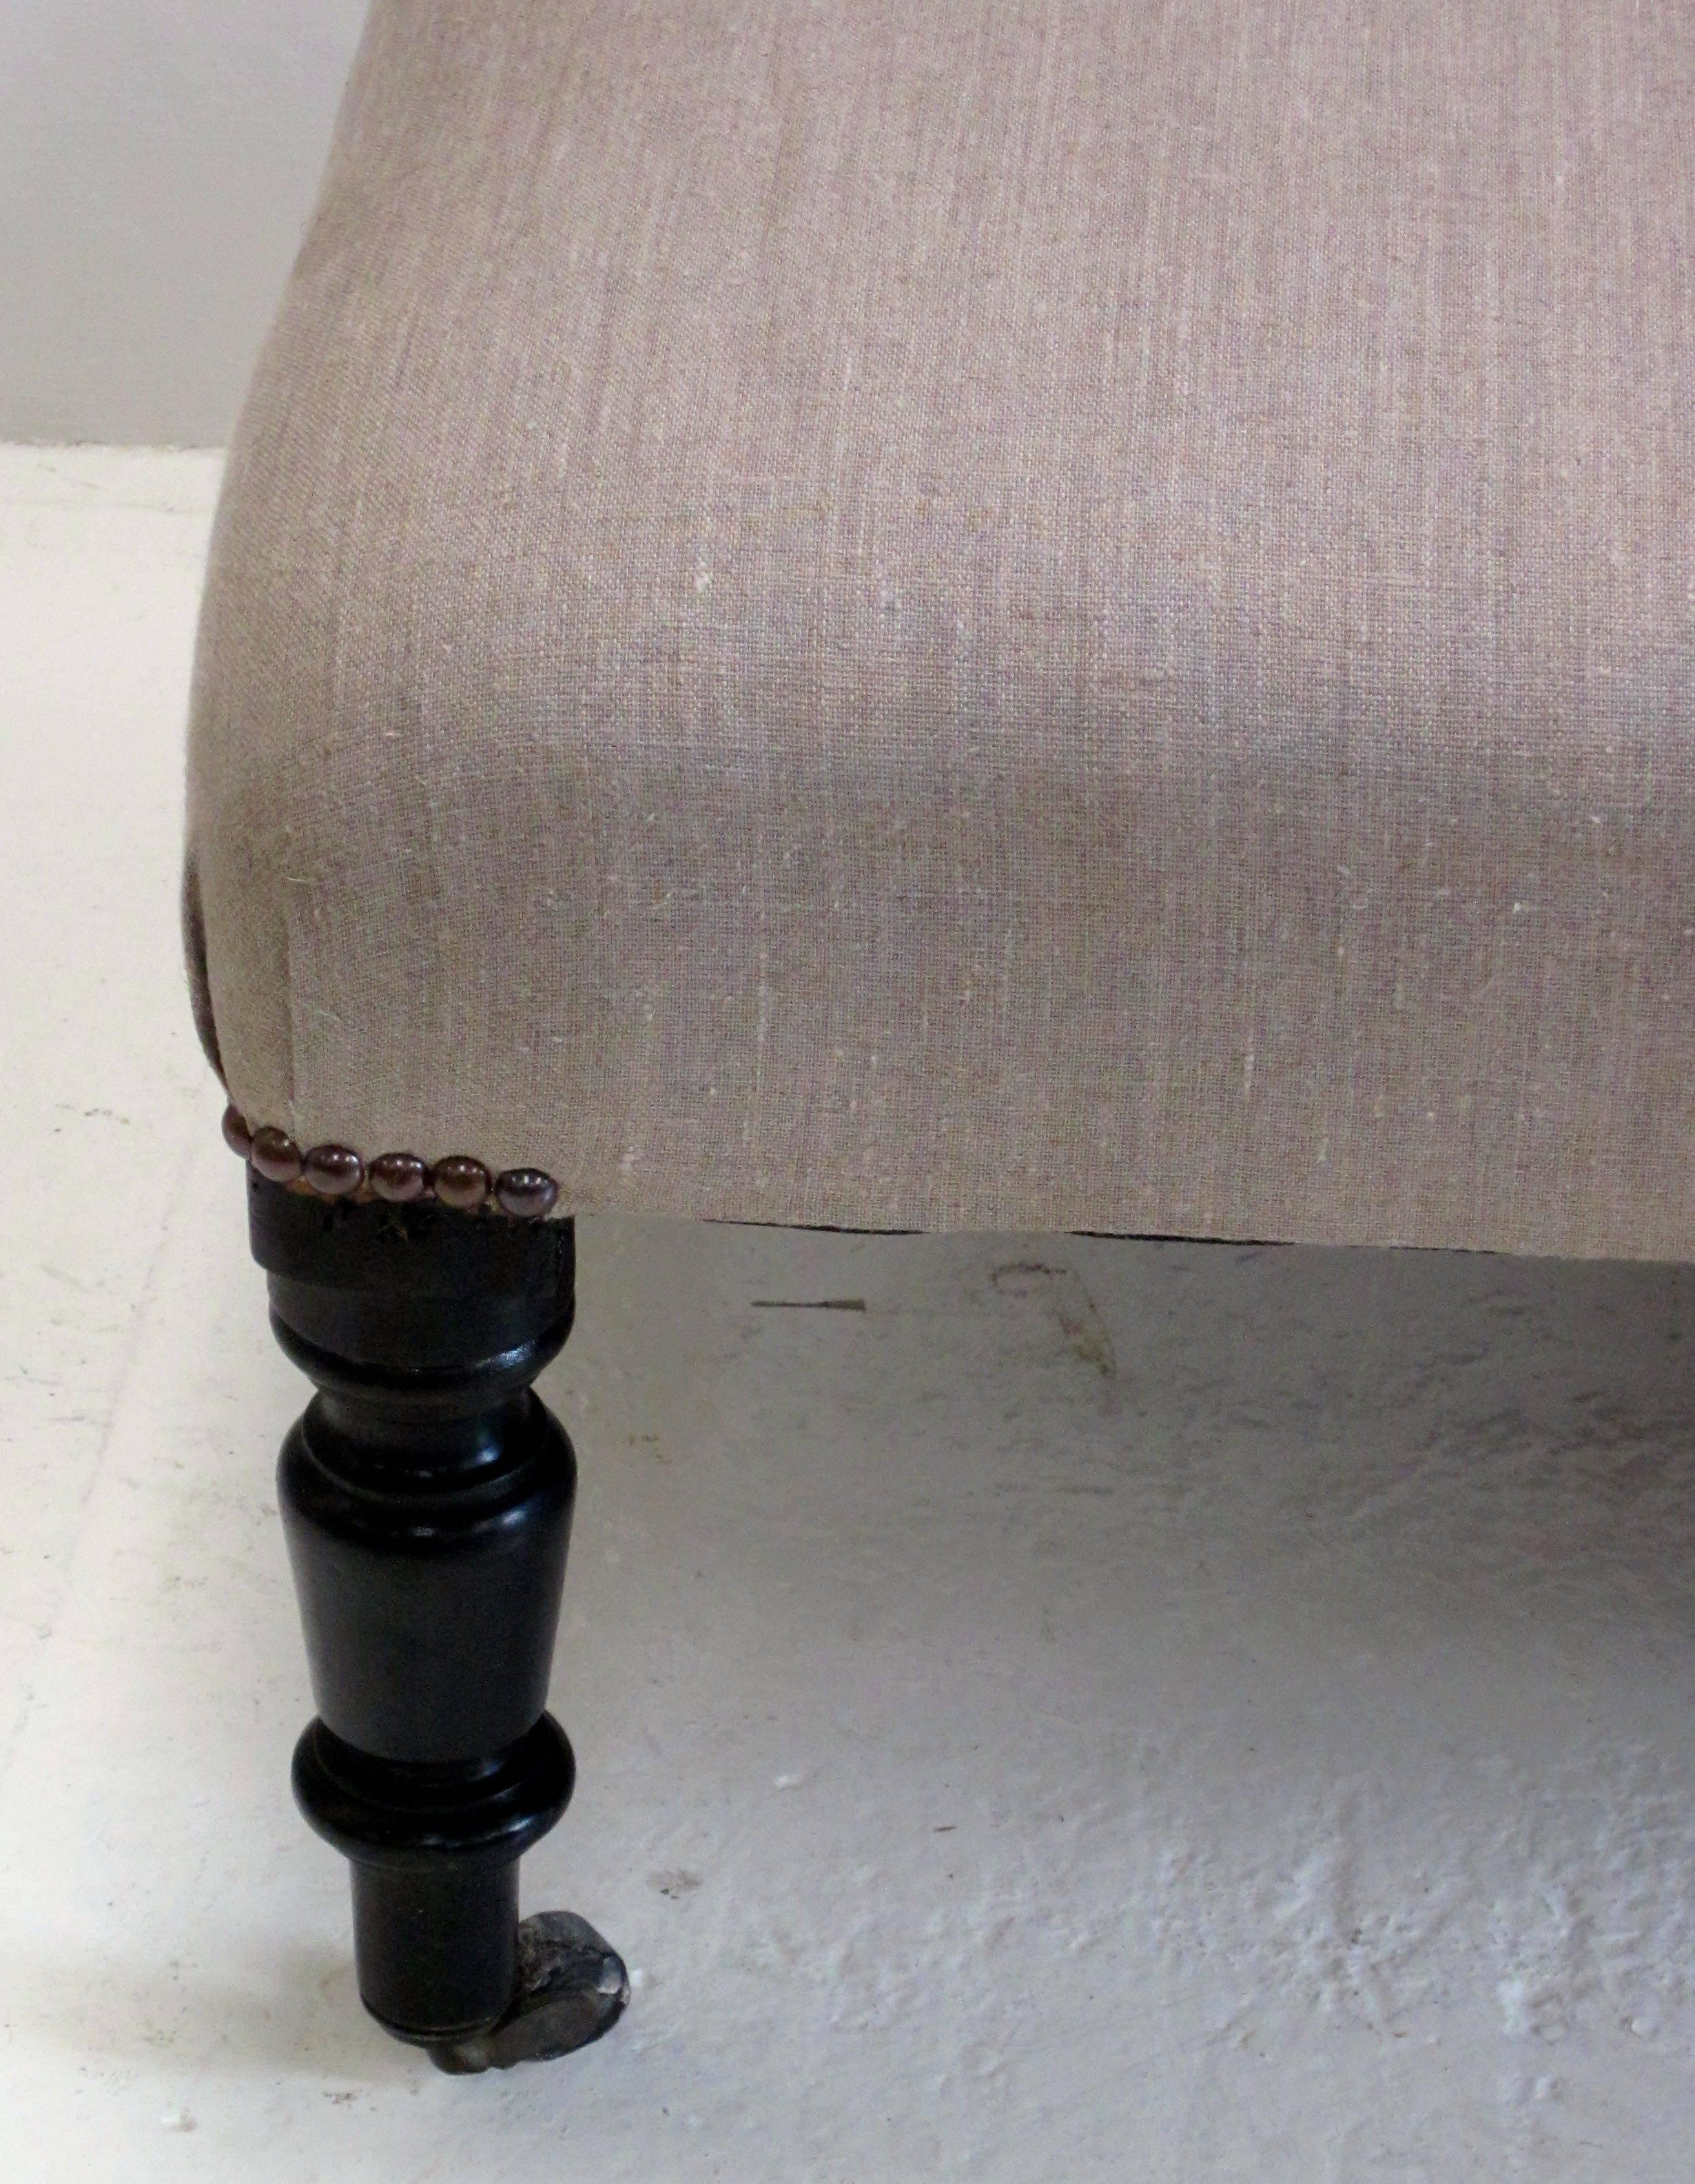 19th century French Napoleon III upholstered foot stool on casters.
Recently reupholstered in beige linen.

